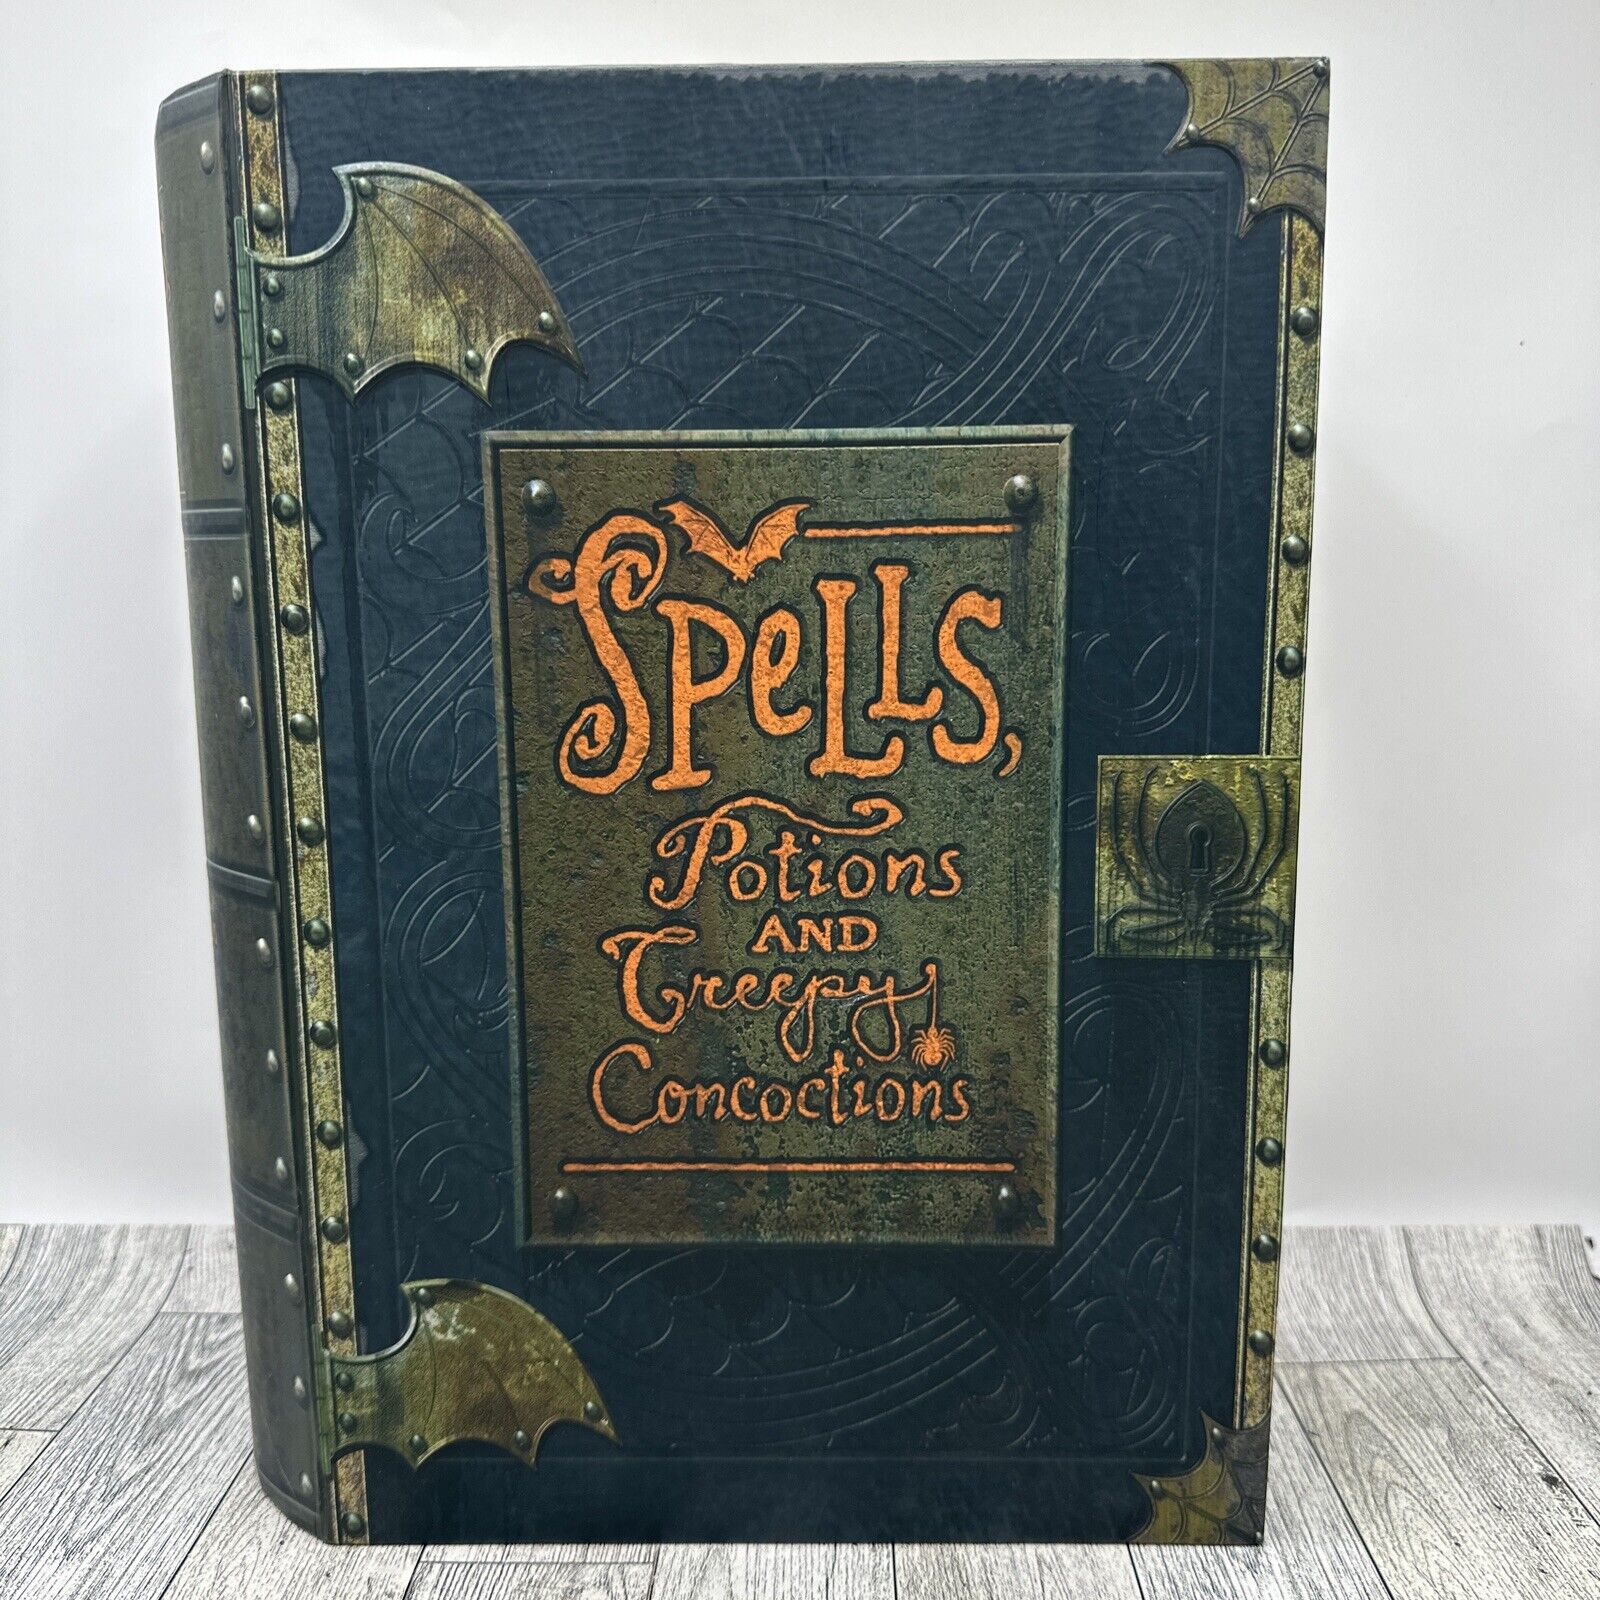 Hallmark Halloween Spells Potion Creepy Concoction Talking Container Book Tested